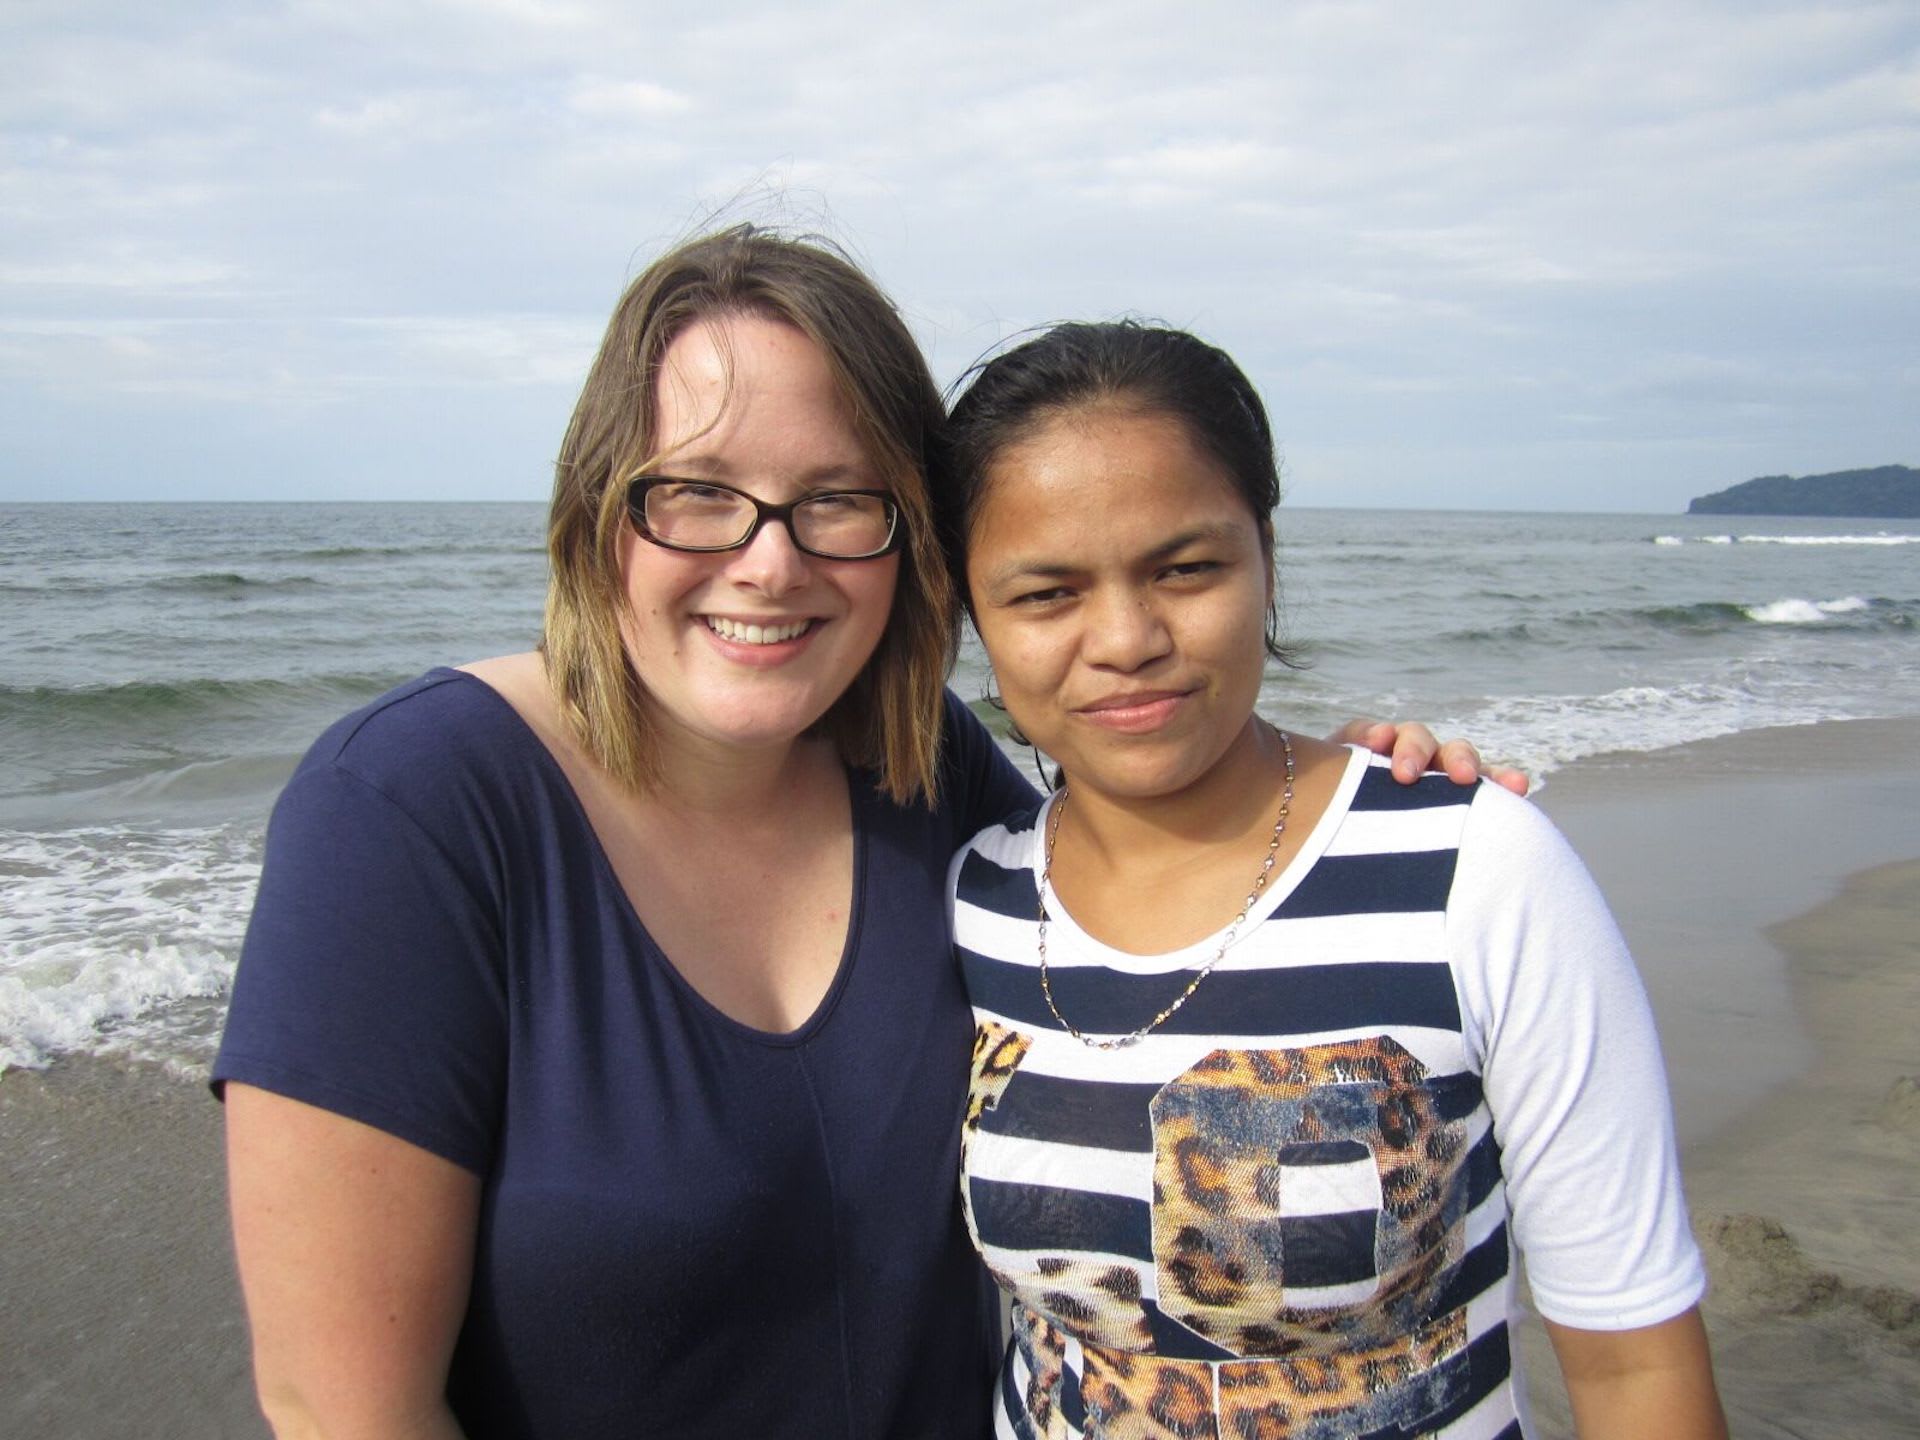 Two women stand together on a beach.